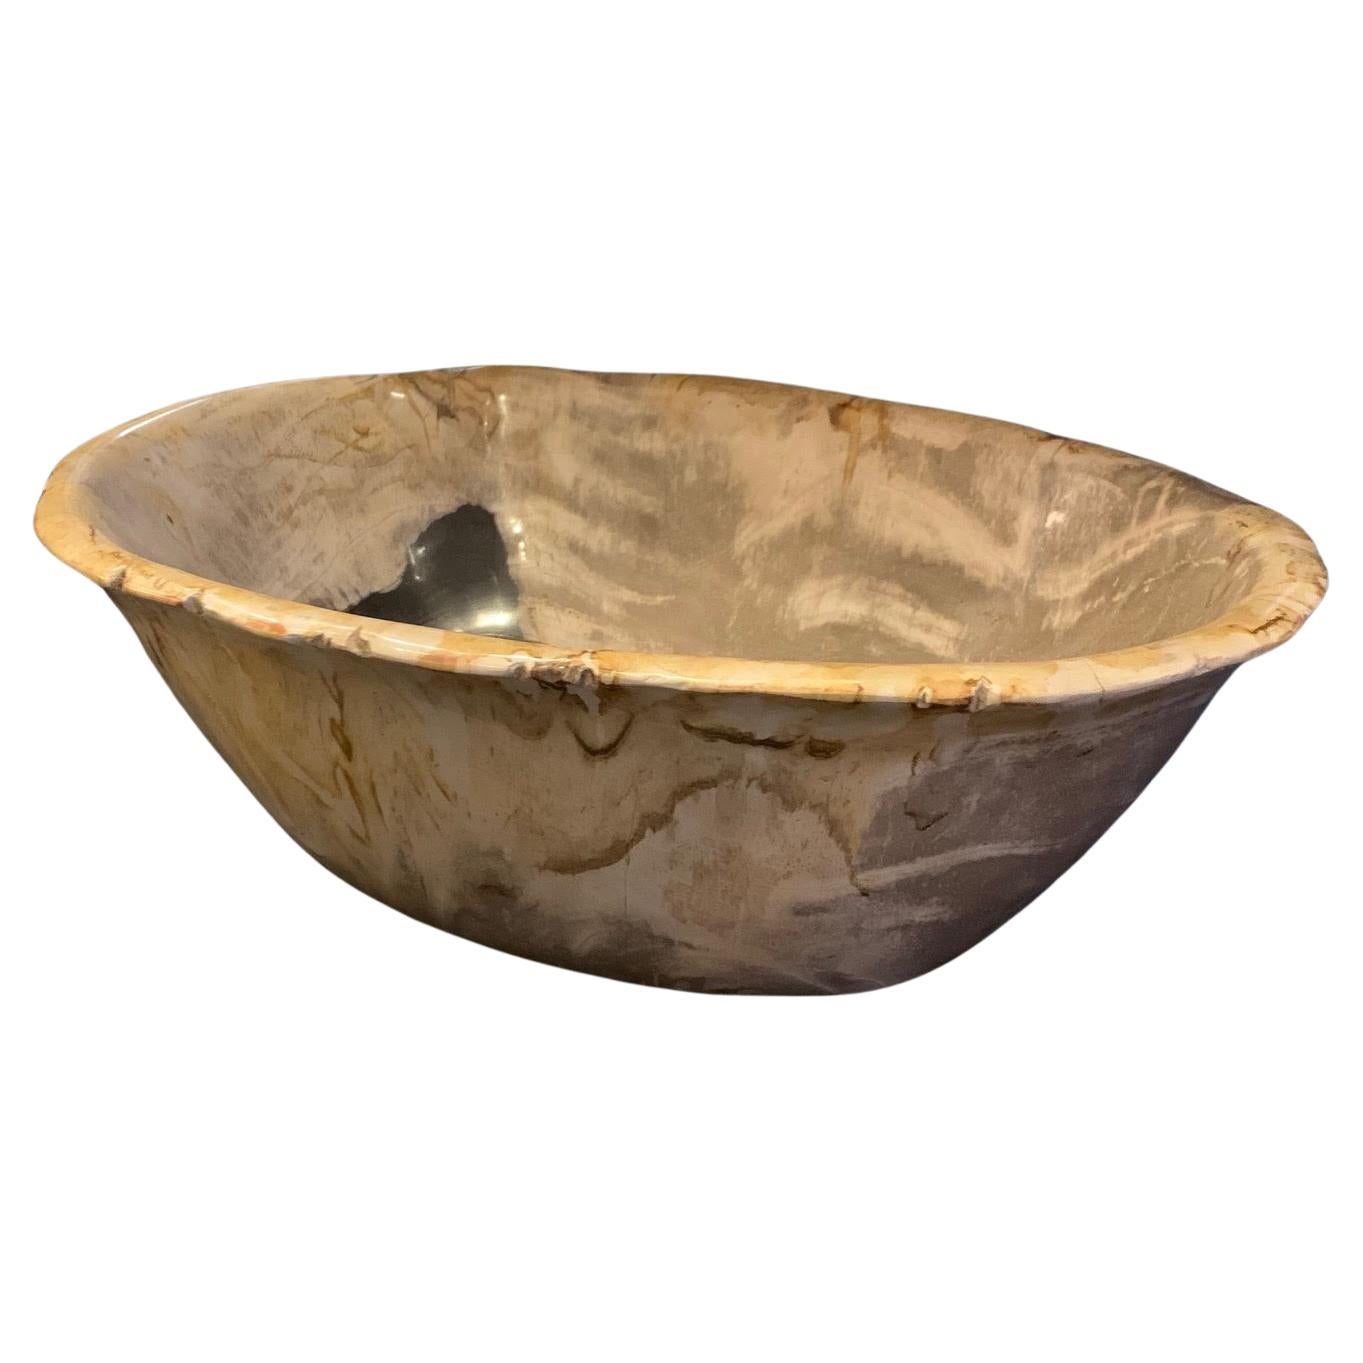 Contemporary Indonesian large petrified wood bowl.
Beige with black accents.
From a collection of petrified wood bowls and platters.